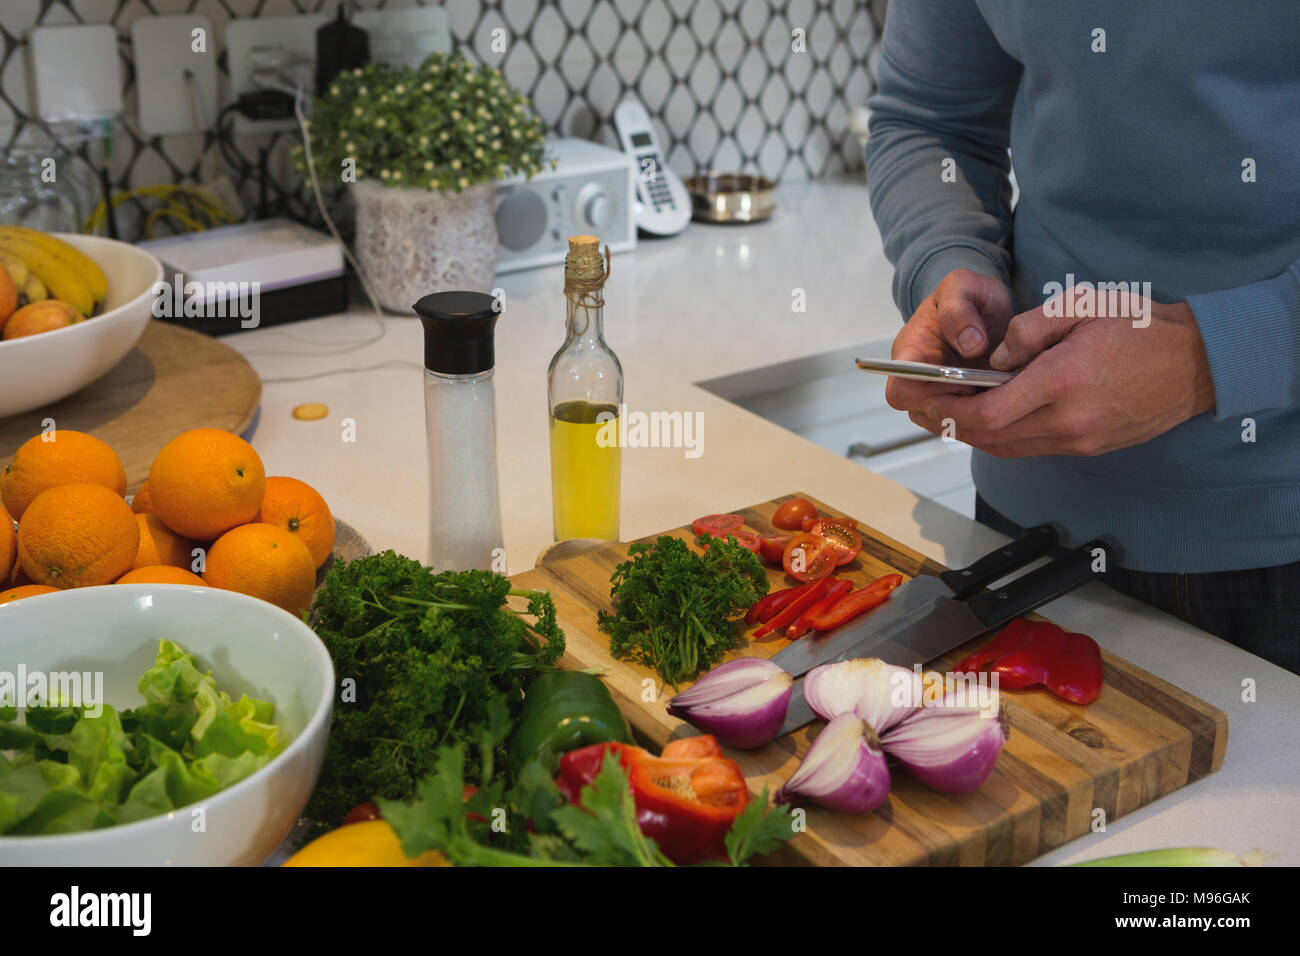 Man using mobile phone while cutting vegetables in kitchen Stock Photo